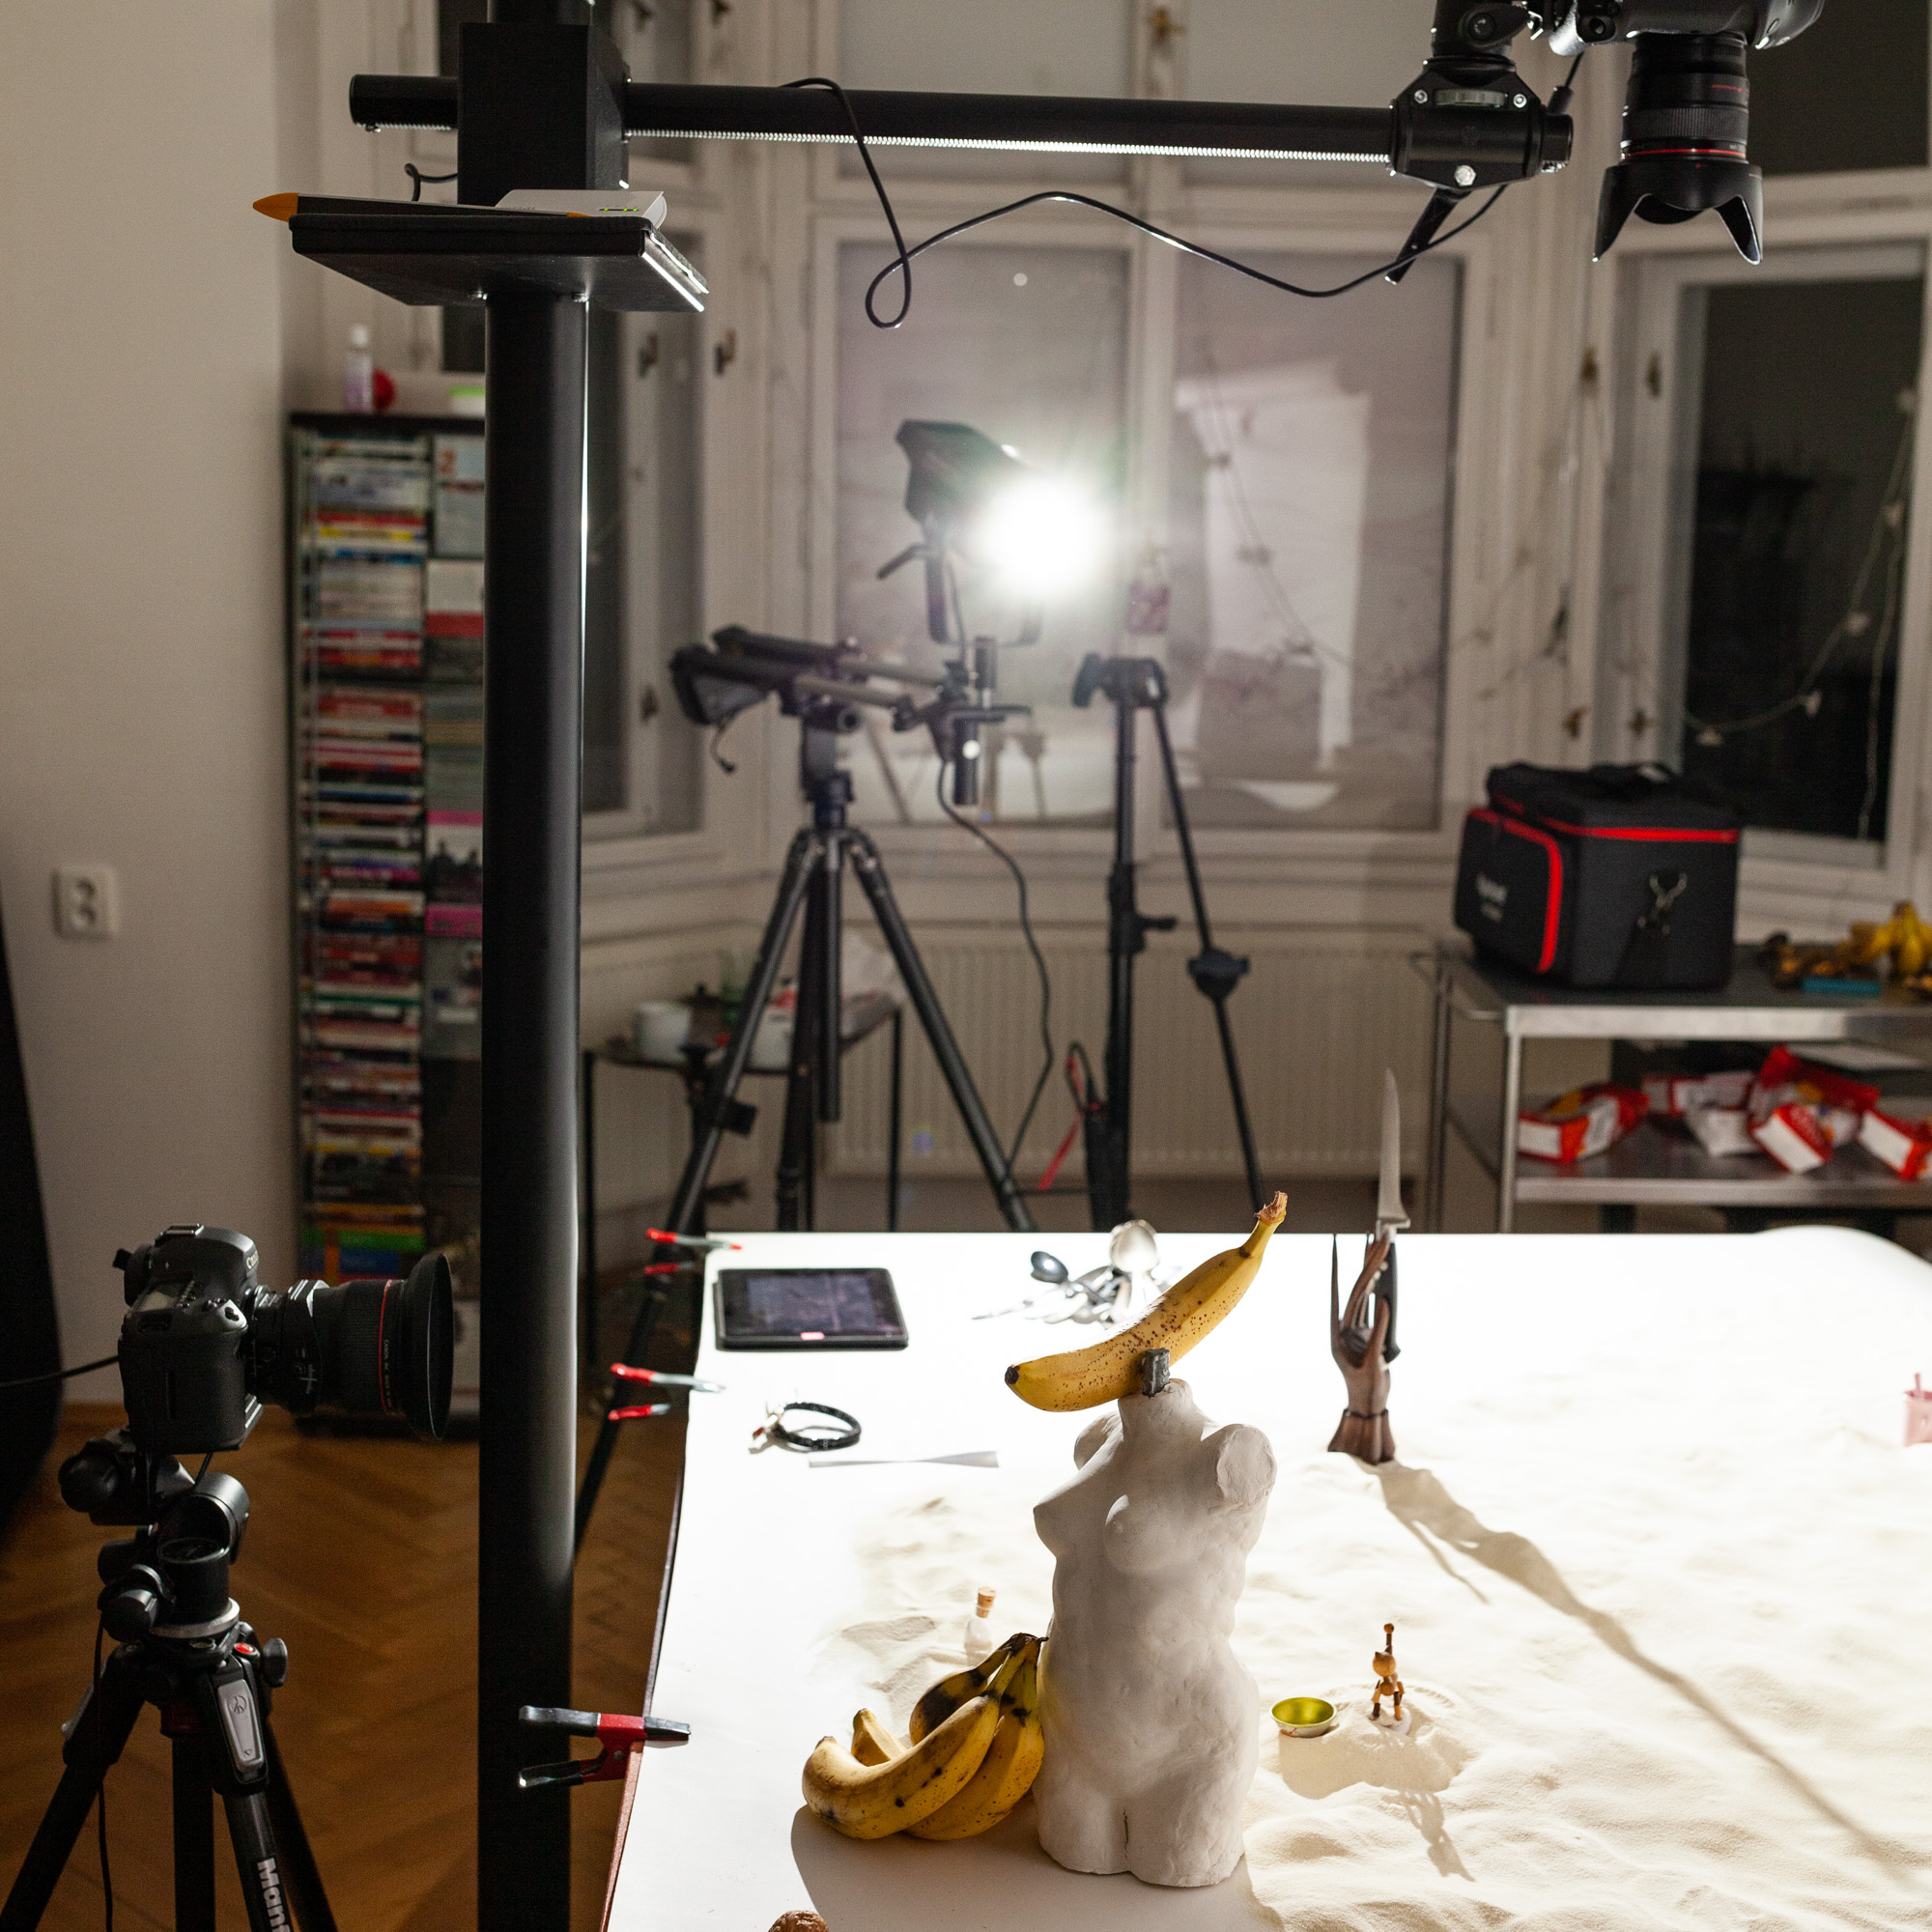 Behind the scenes of foodlydoodlydoo's vegan banana bread recipe. The photo shows the preparation of a scene. A statue of a naked women's torso decorated with bananas is seen as well as a wooden hand holding a knife. Cameras and lights are set around the scene.